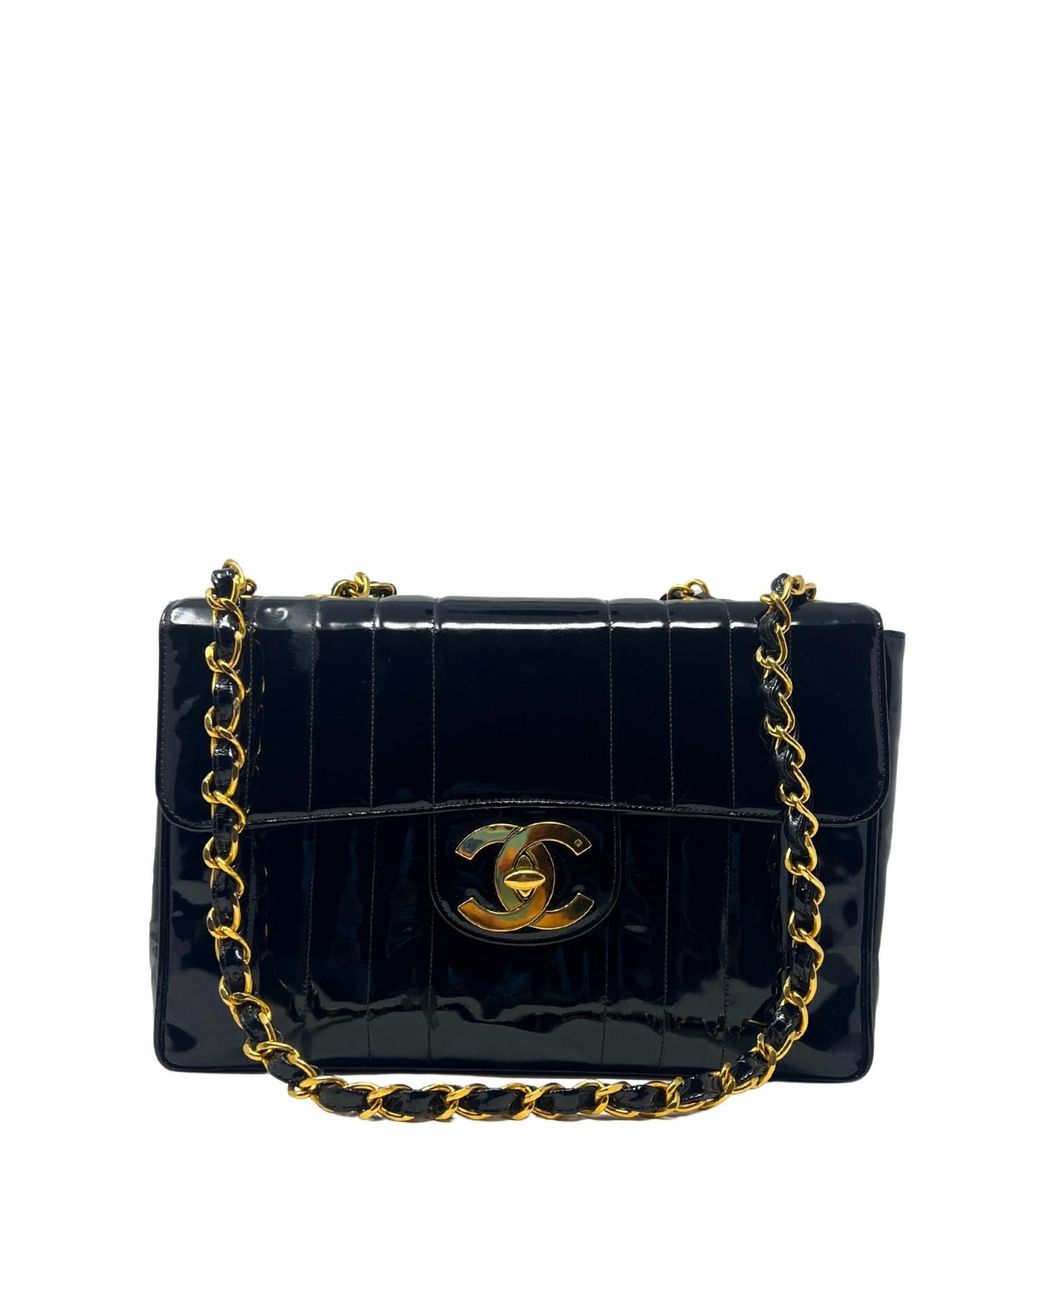 Chanel Patent Leather Mademoiselle Jumbo Single Flap In Black in